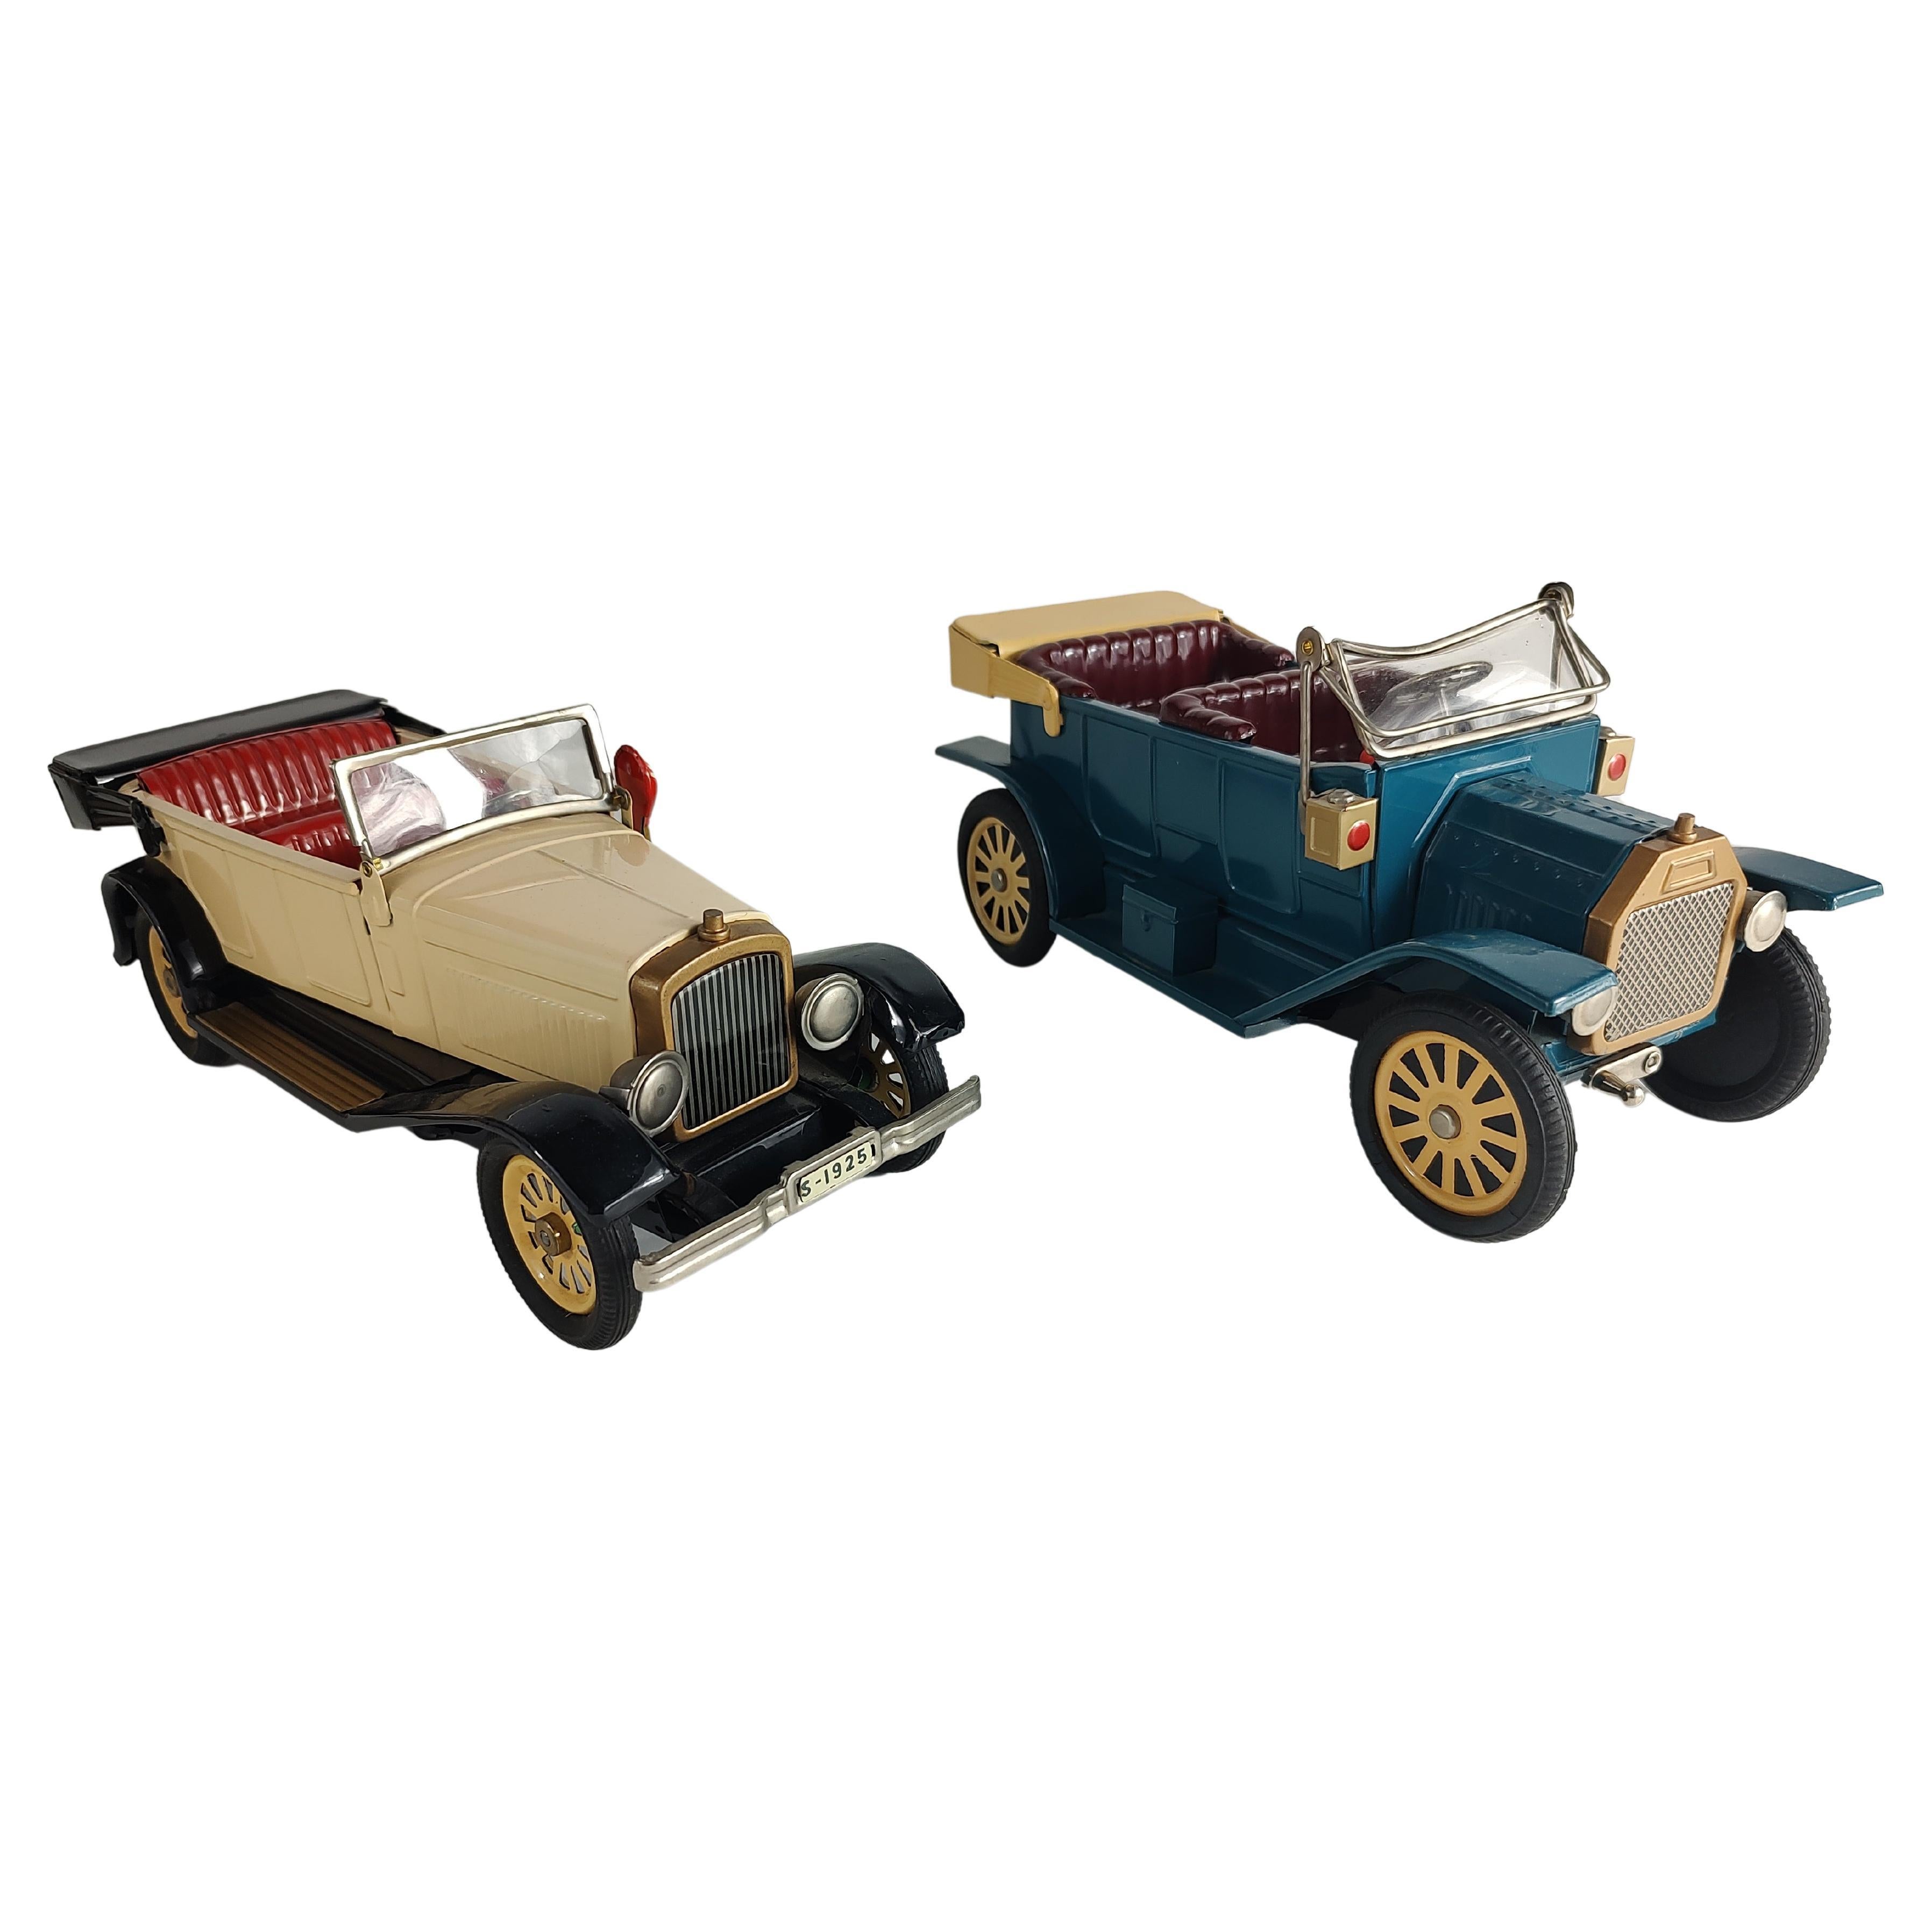 Mid Century Japanese Tin Litho Toy Car Replicas Fords 1908 & 1925 Touring Cars For Sale